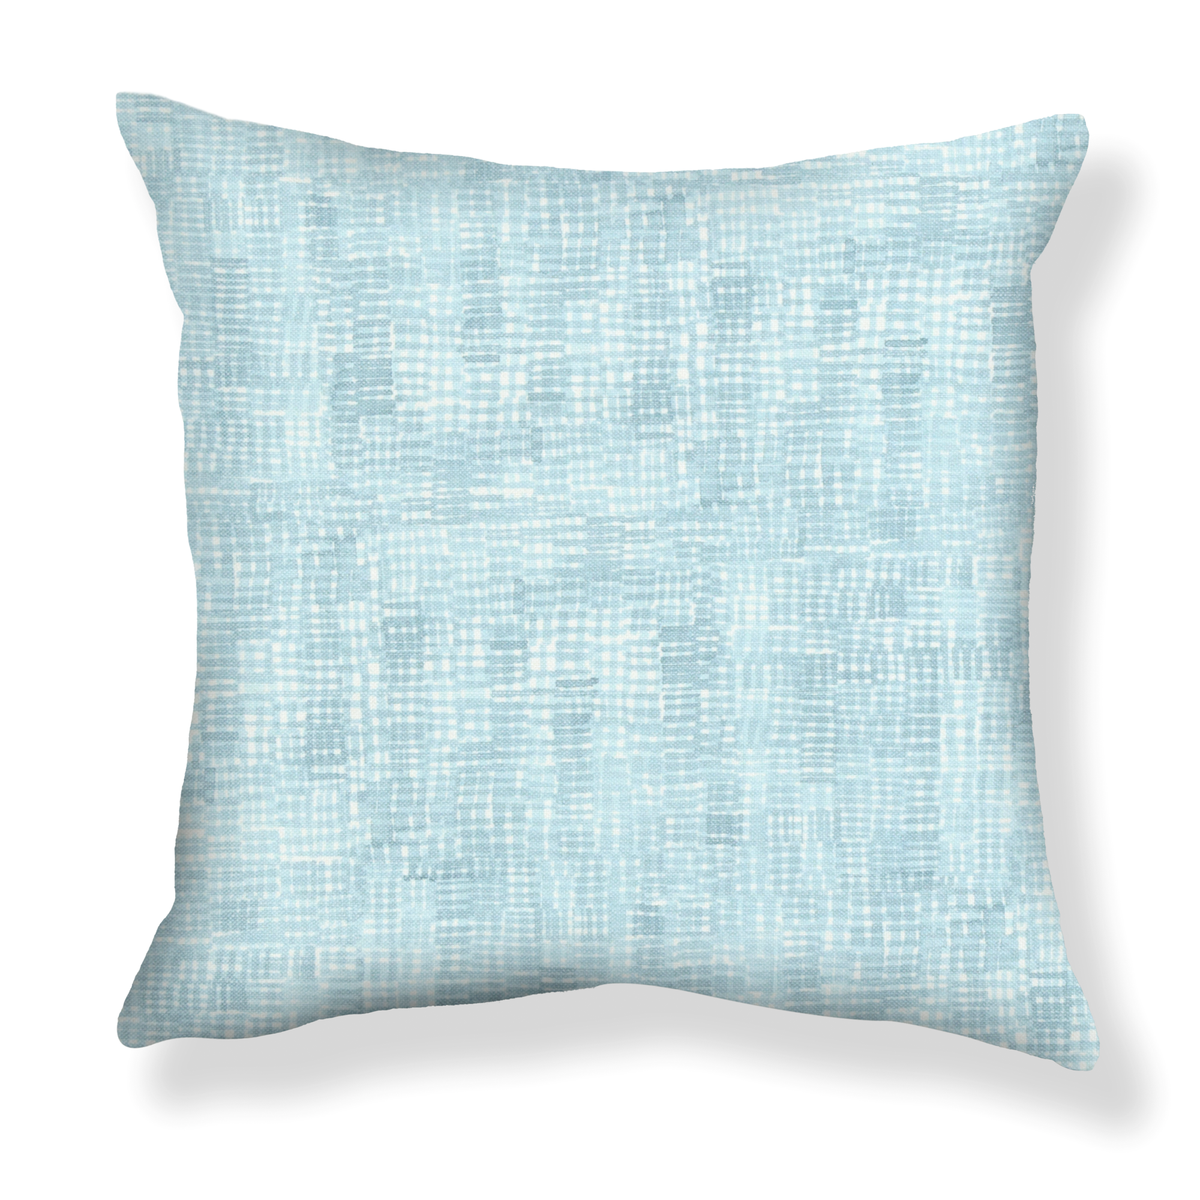 Hatchmarks Pillow in Lagoon Blue